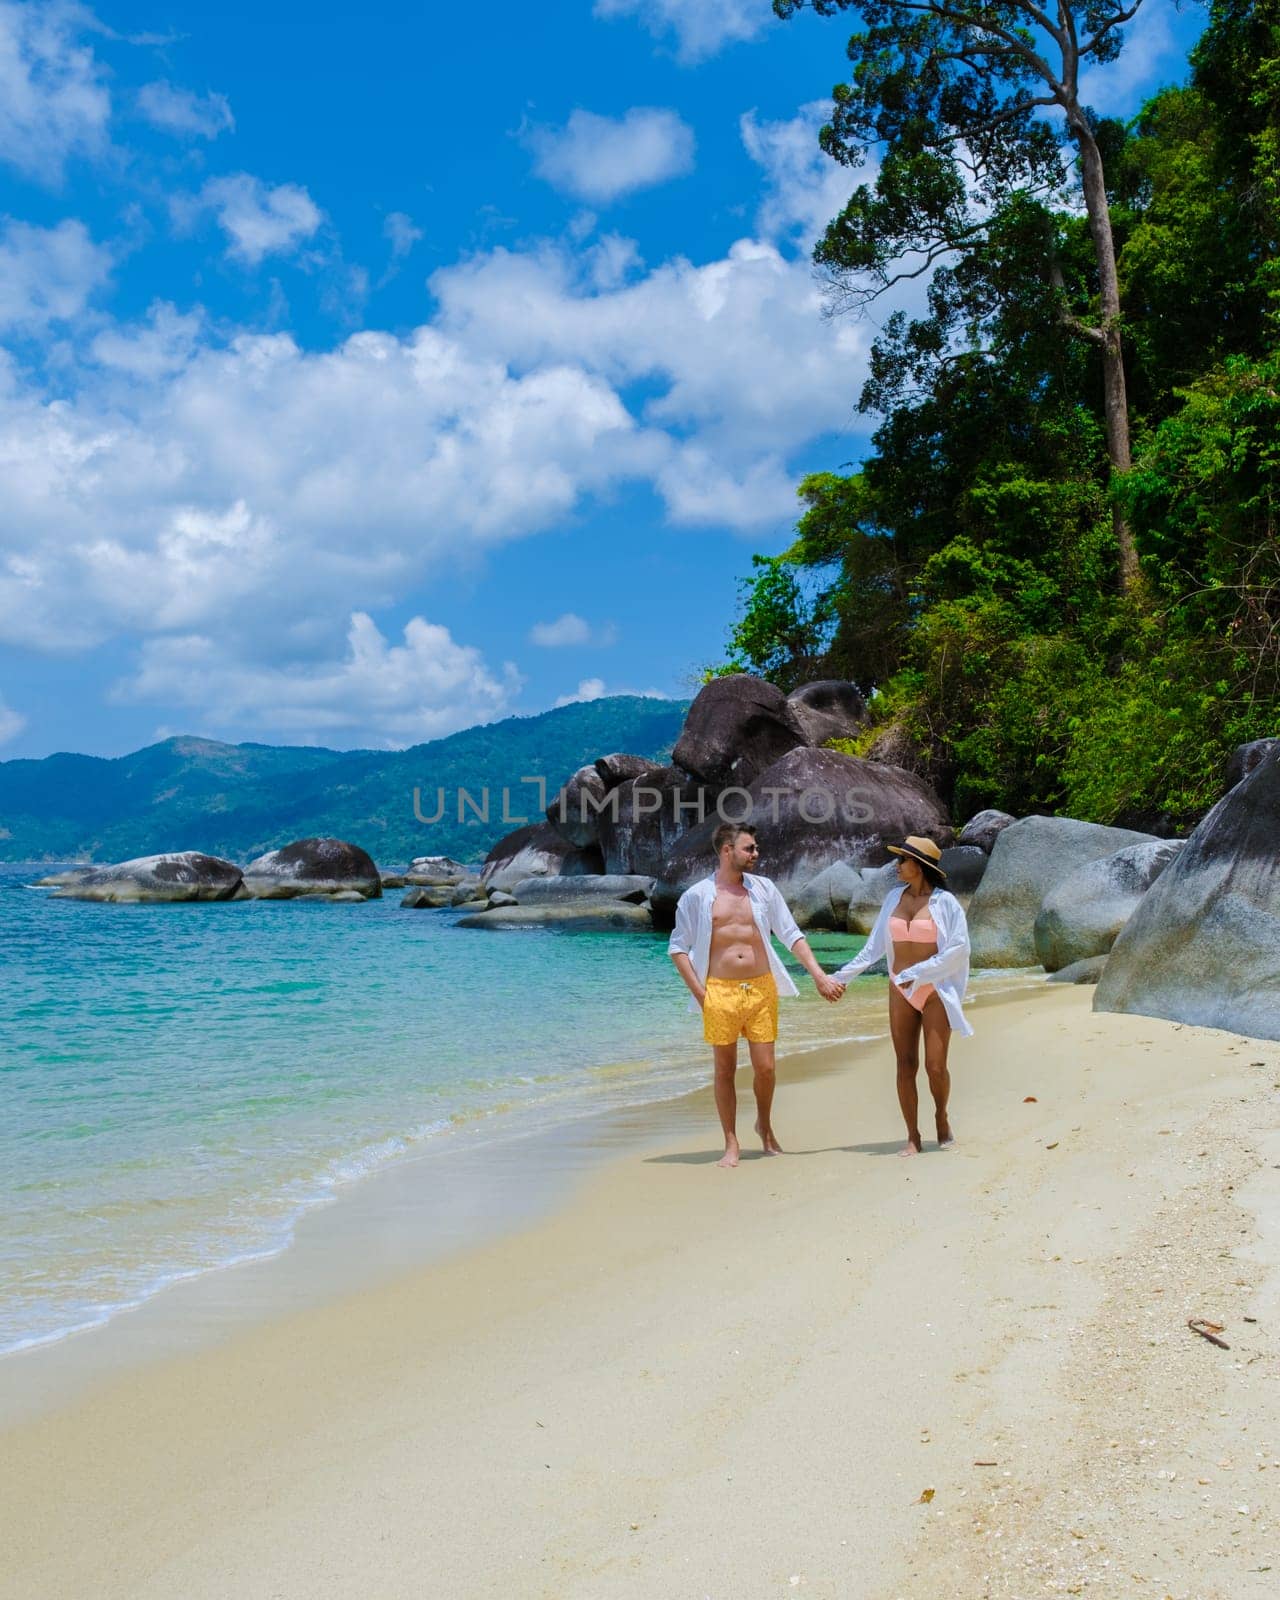 Koh Adang Island near Koh Lipe Island Southern Thailand with turqouse colored ocean and white beach by fokkebok